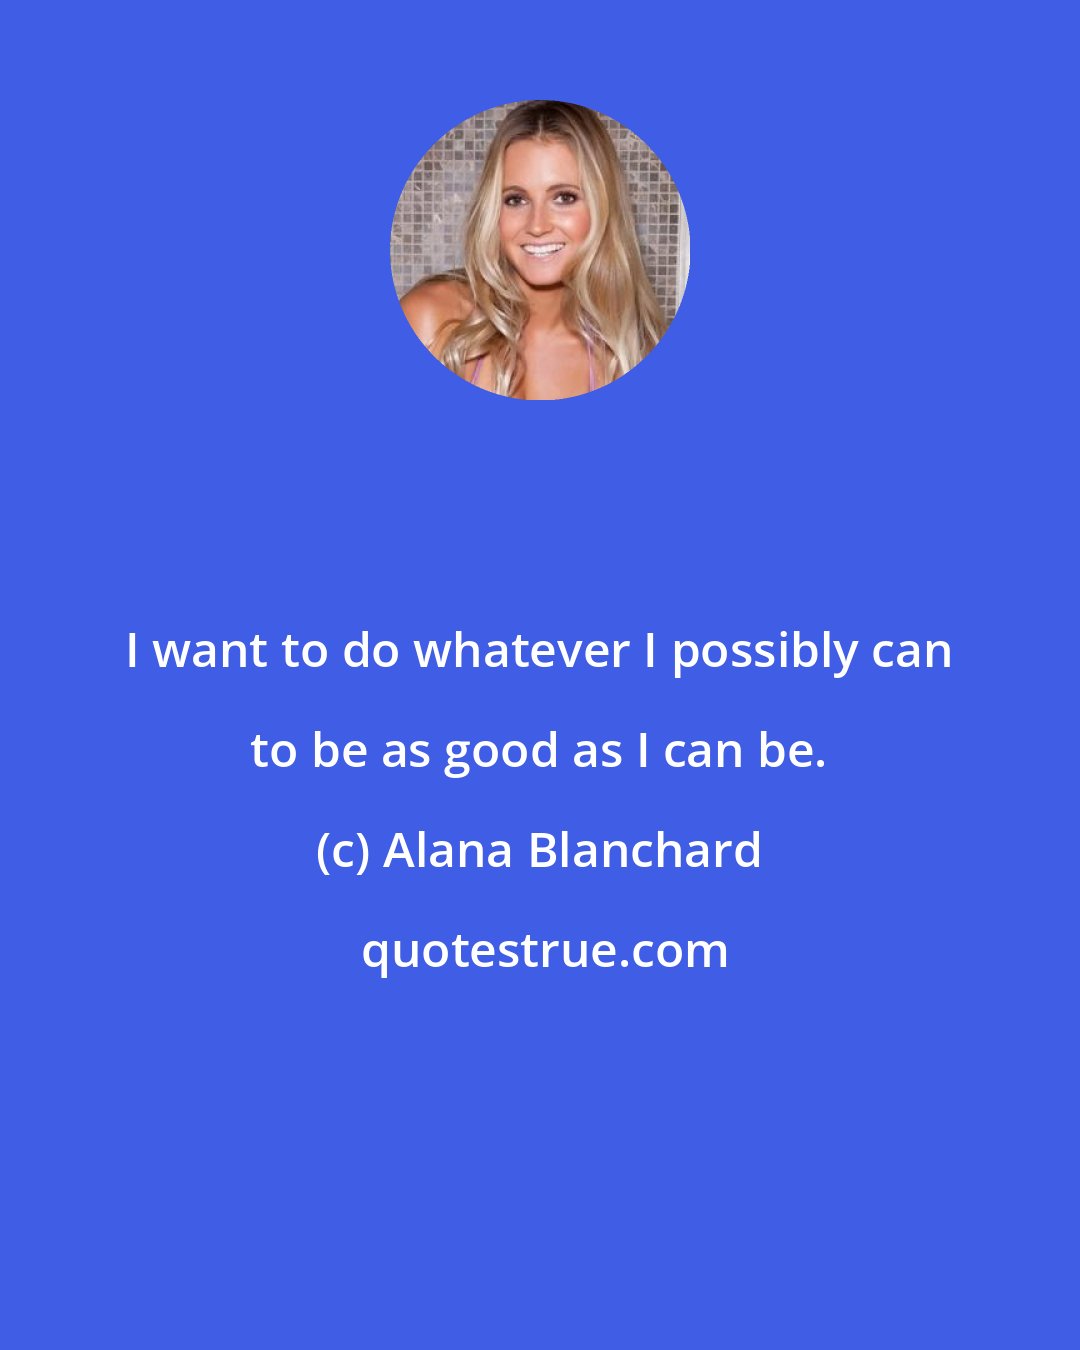 Alana Blanchard: I want to do whatever I possibly can to be as good as I can be.